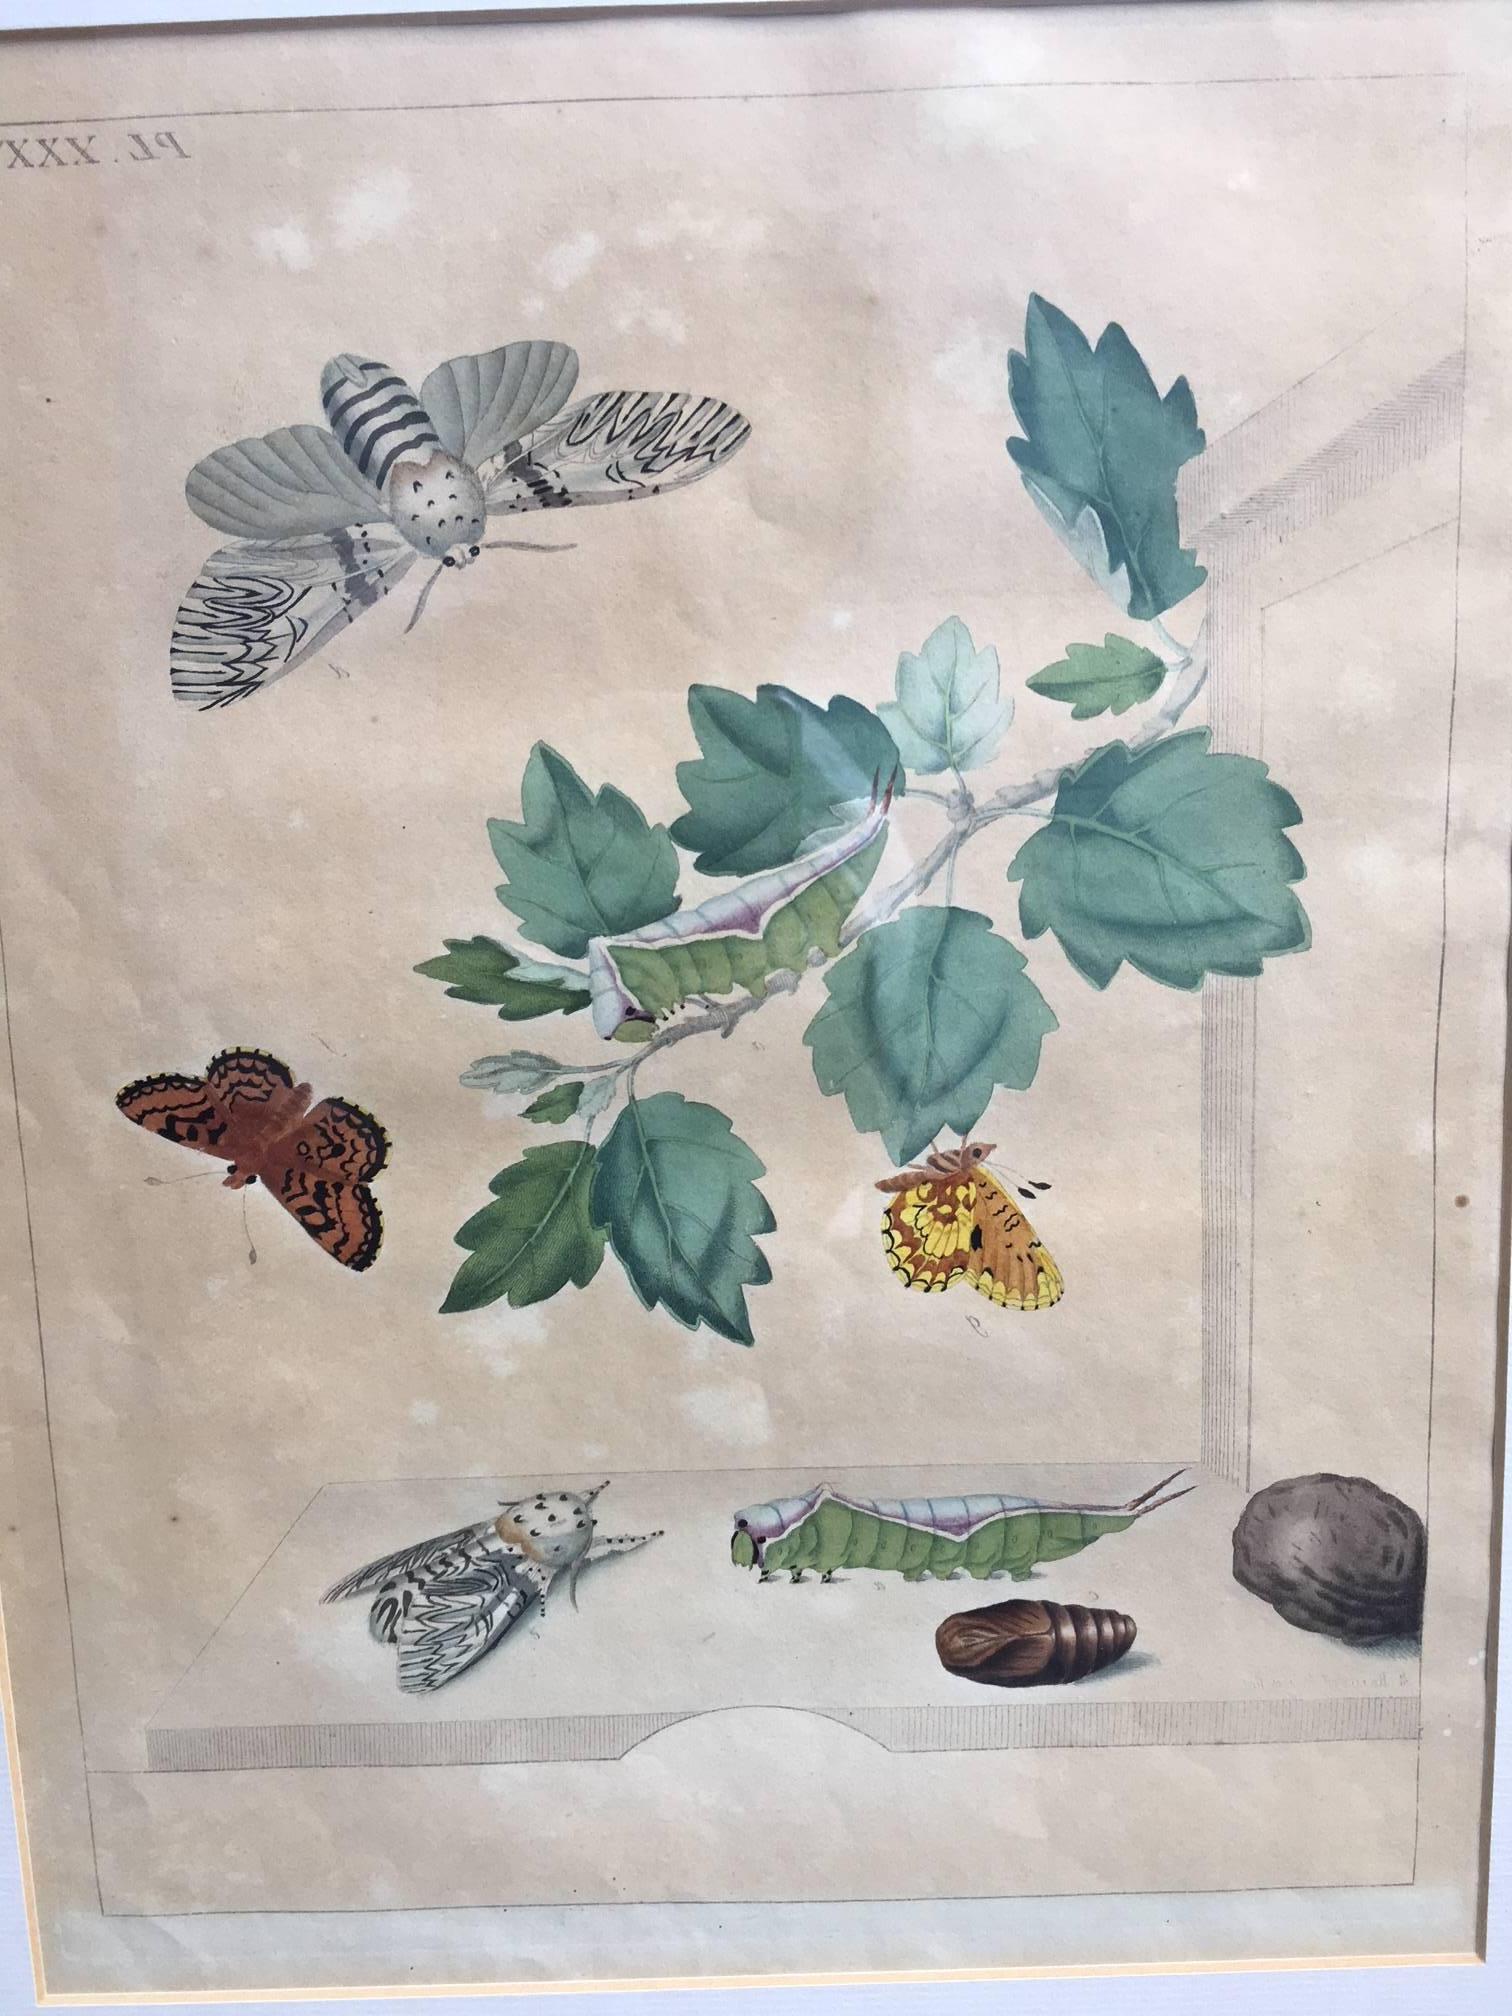 Moses Harris (British 1731-1785 )
The Aurelian, A Natural History of English Moths and Butterflies by Moses Harris (1731-1785). Hand-colored in London in 1840 by Henry Bohn.
Metamorphosis - a set of six engravings, London 1766.
All frames were